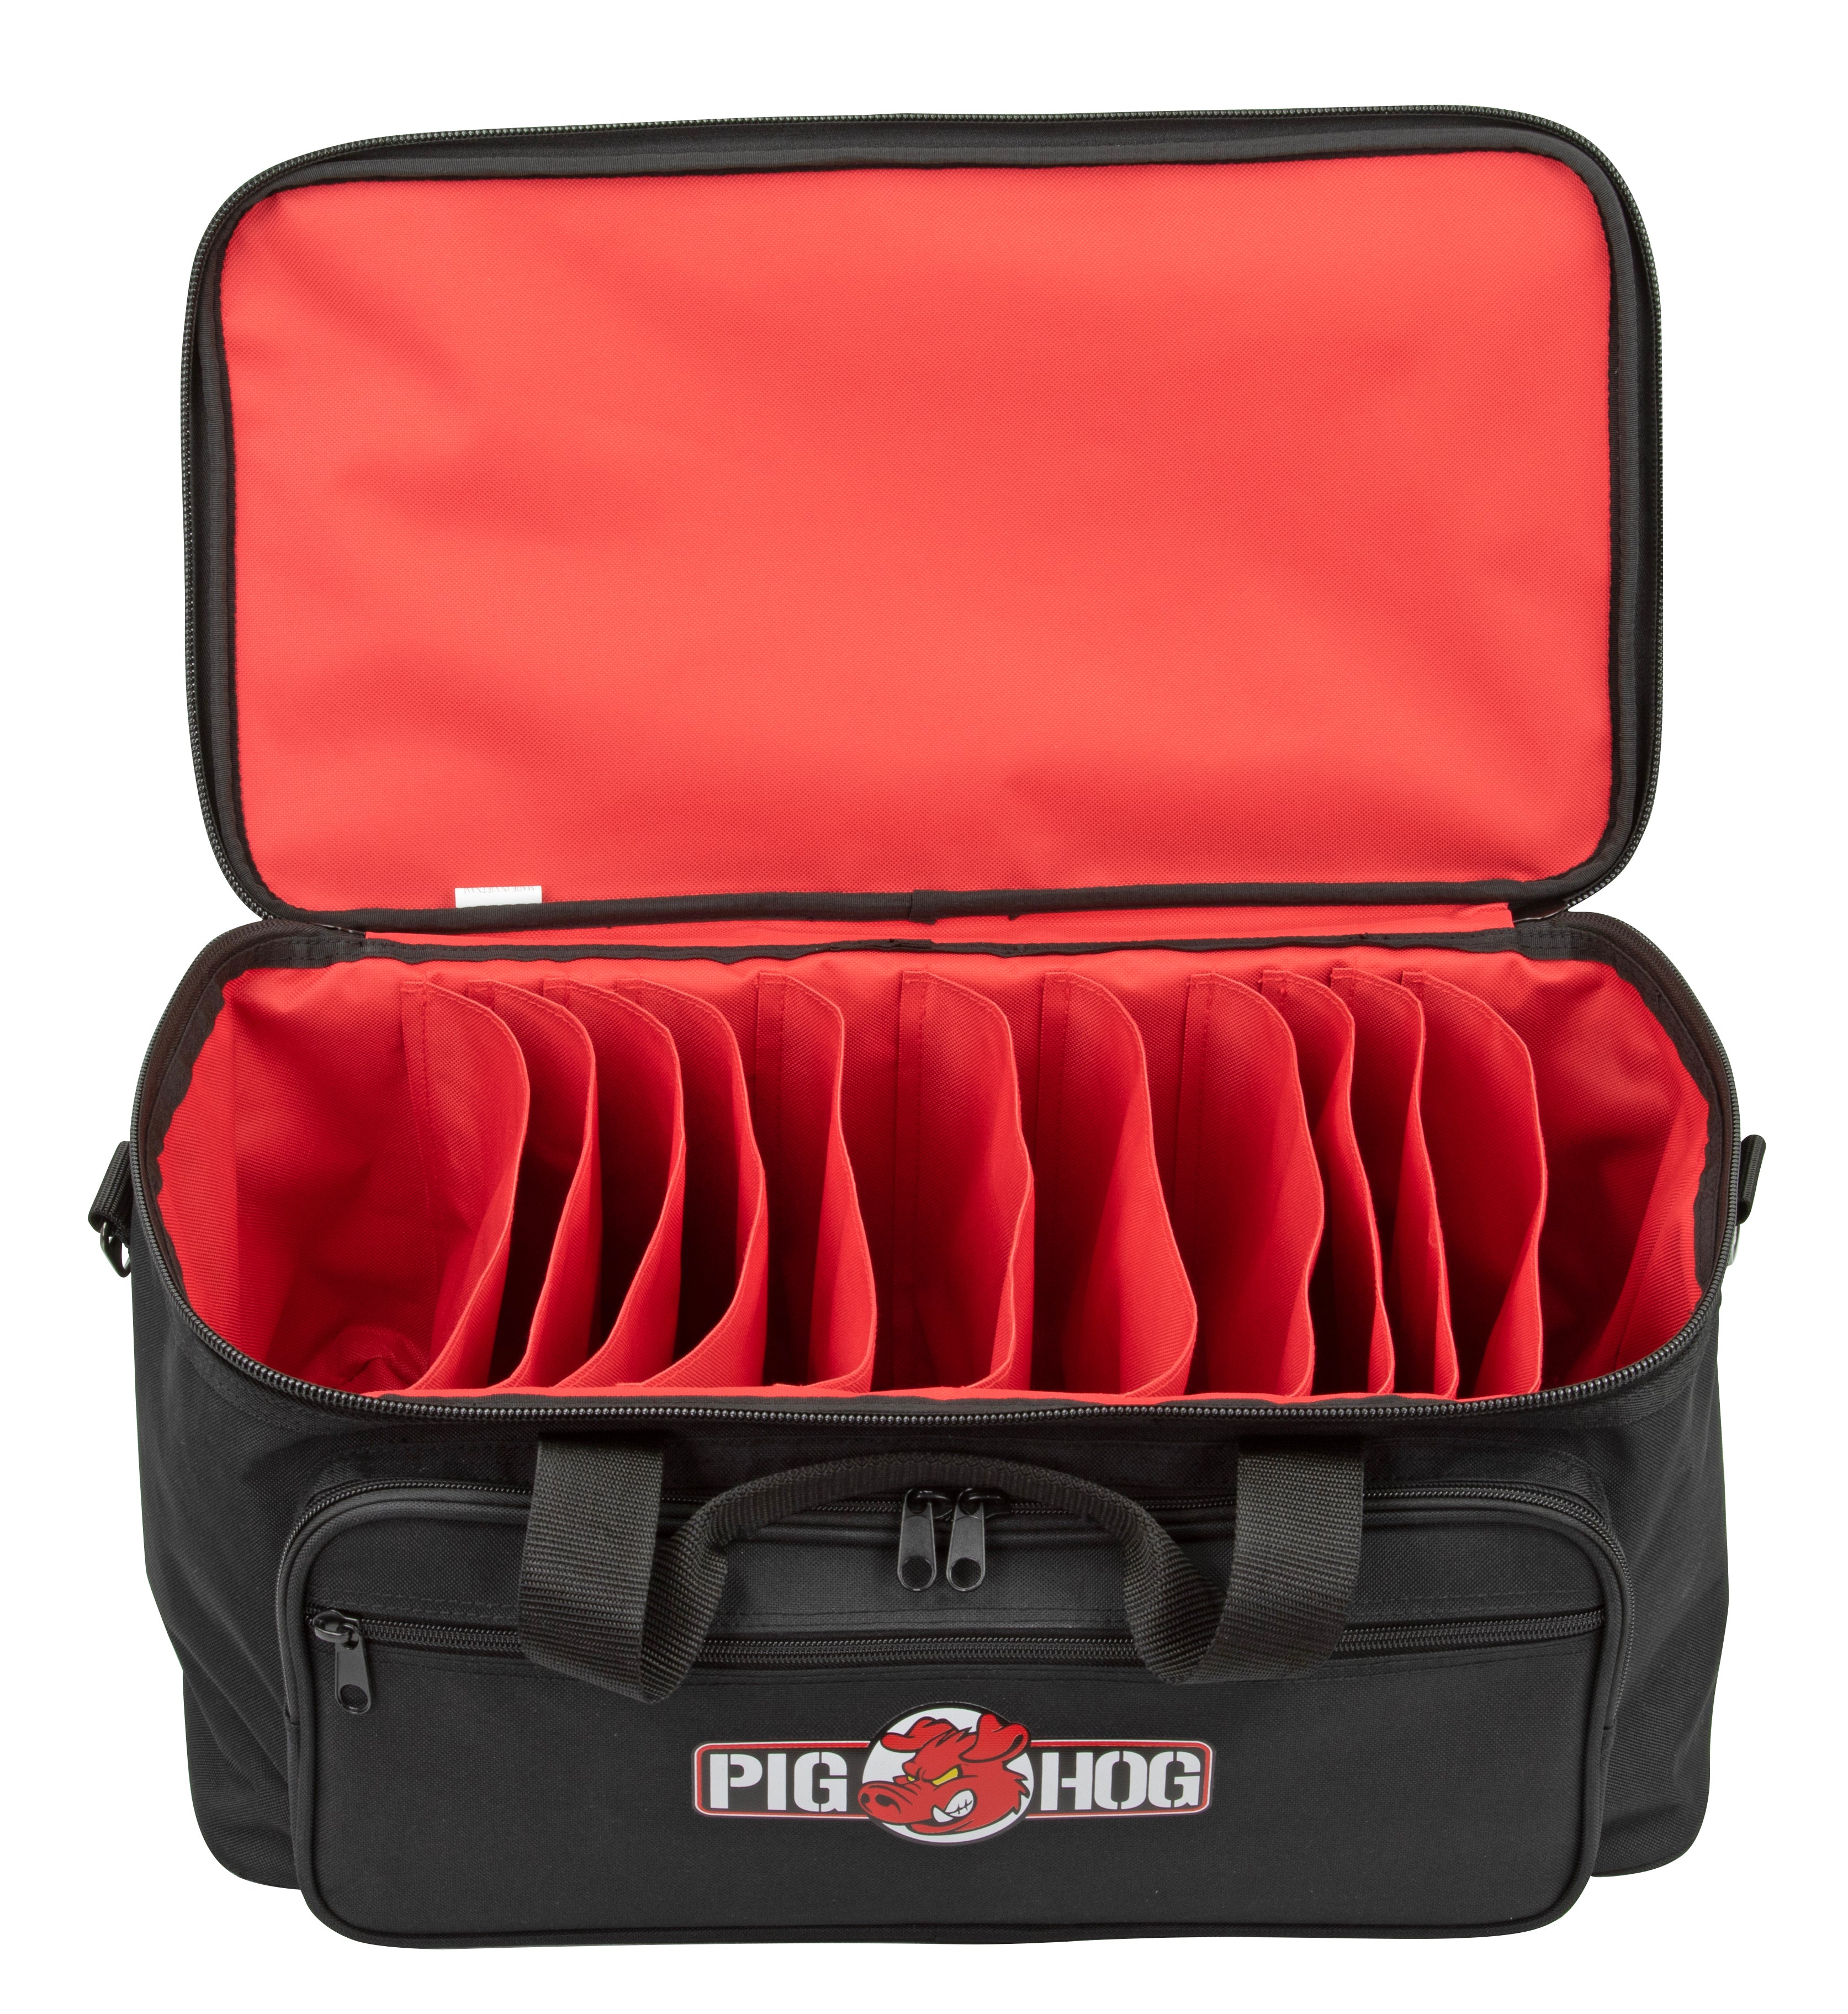 Large Travel Gig Band Cable File Bag,With Double Separate Bags